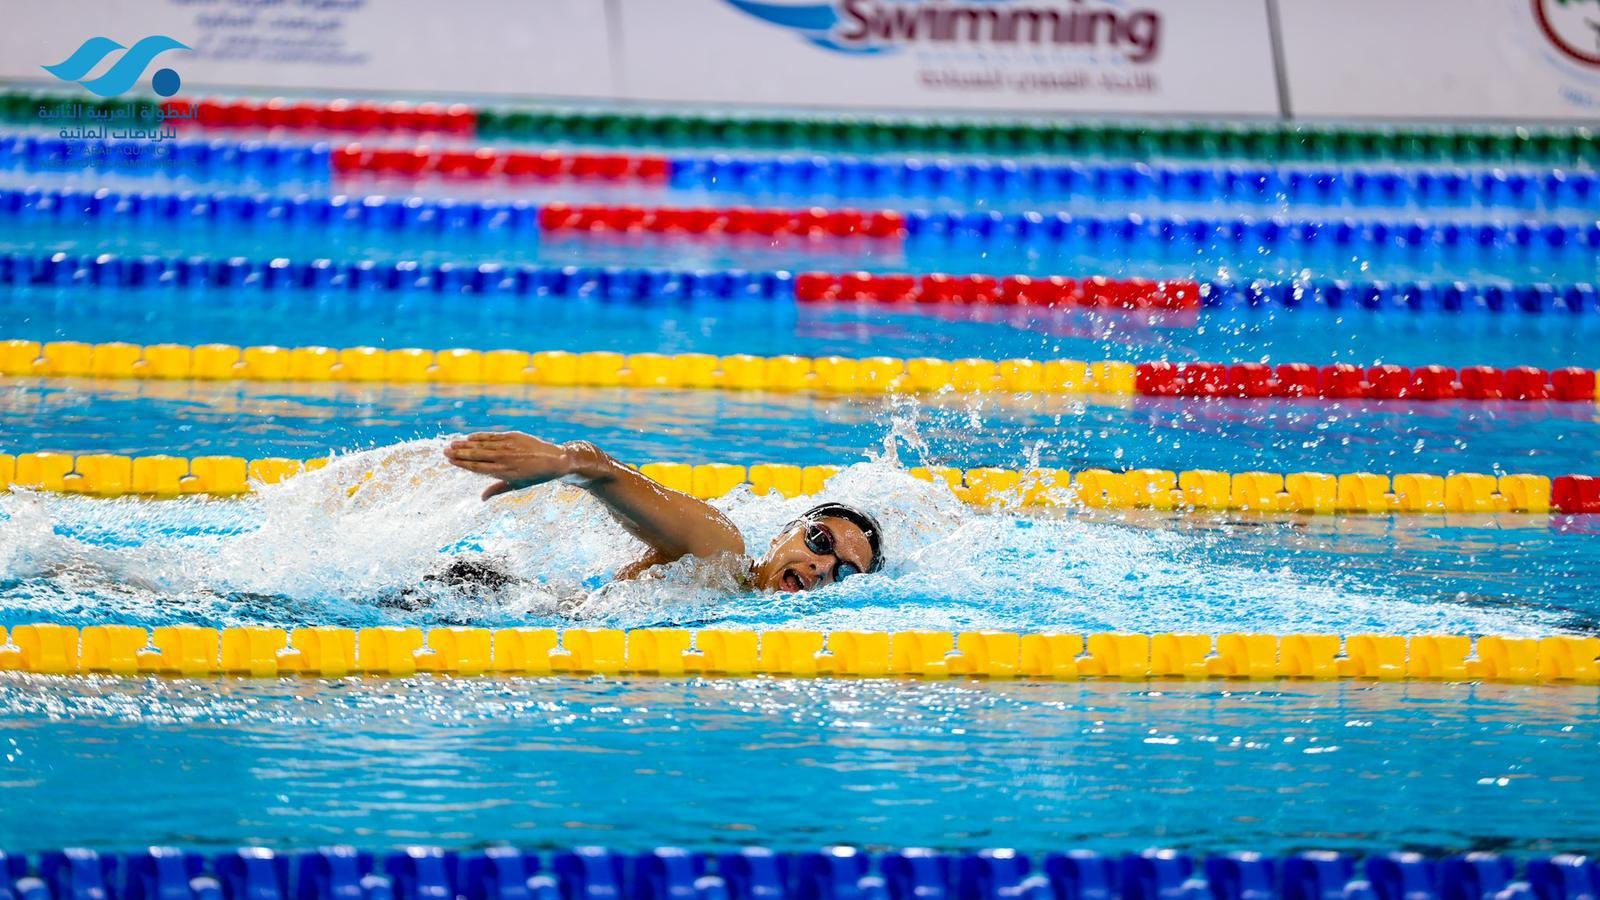 The 2nd Arab Aquatics Age Group Championships get underway in Doha